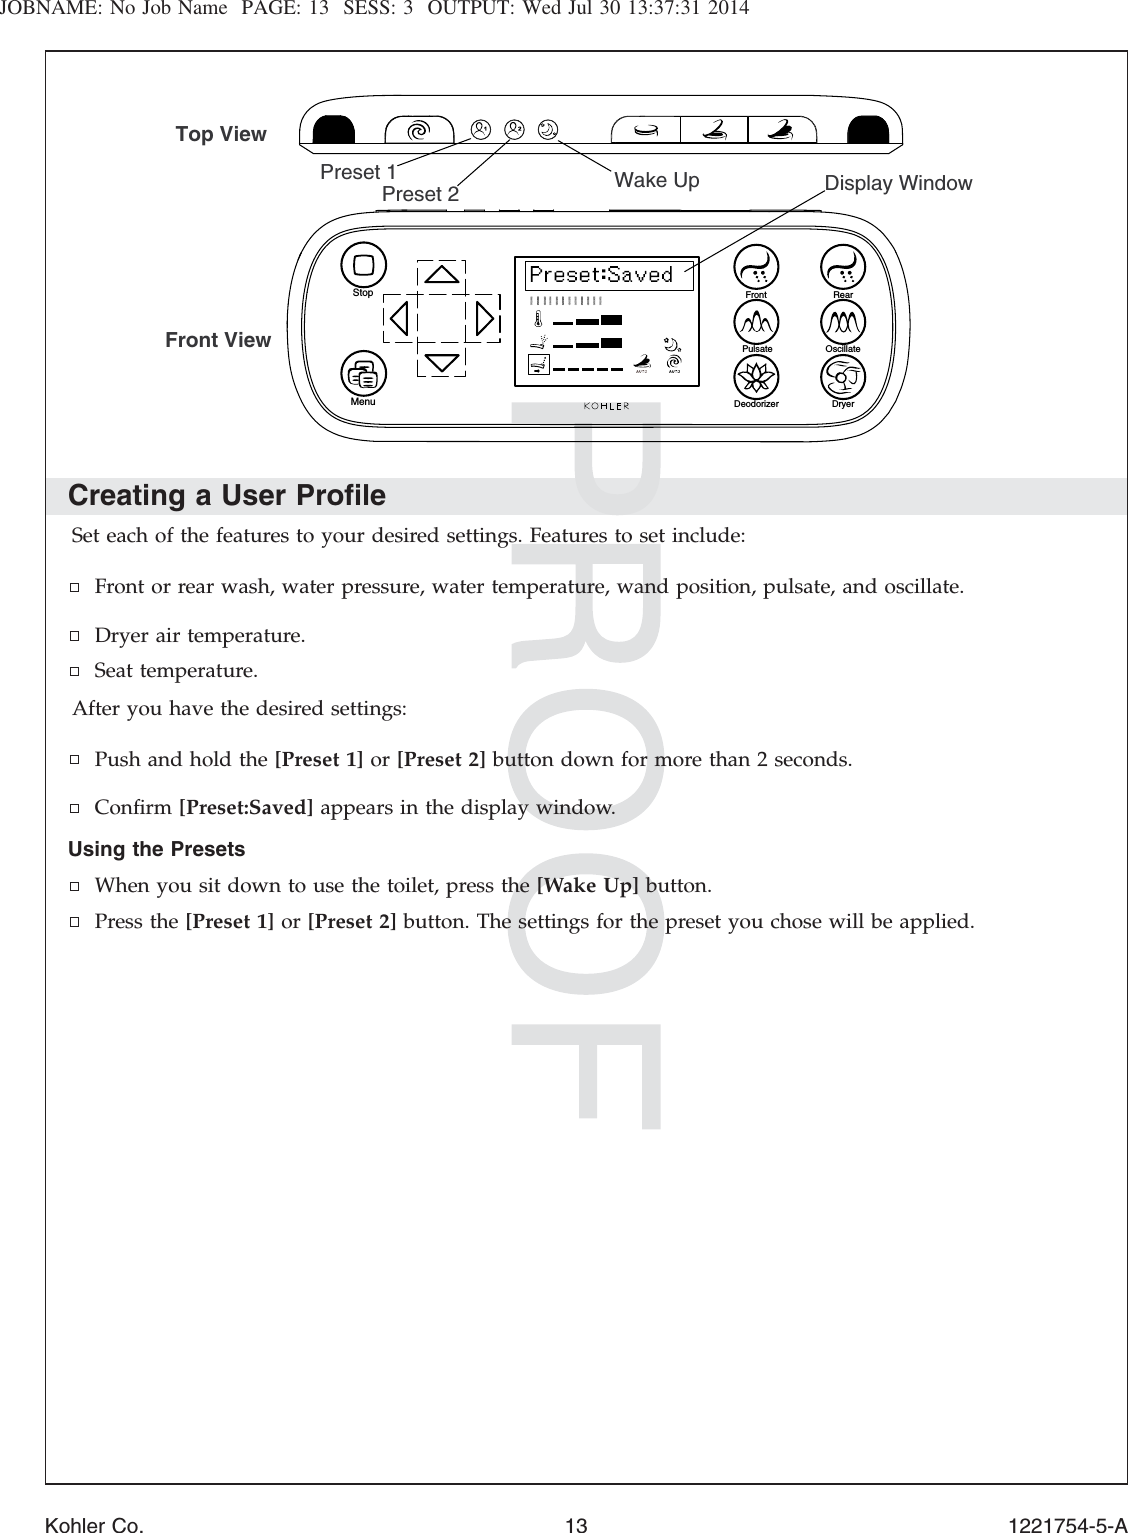 JOBNAME: No Job Name PAGE: 13 SESS: 3 OUTPUT: Wed Jul 30 13:37:31 2014Creating a User ProﬁleSet each of the features to your desired settings. Features to set include:Front or rear wash, water pressure, water temperature, wand position, pulsate, and oscillate.Dryer air temperature.Seat temperature.After you have the desired settings:Push and hold the [Preset 1] or [Preset 2] button down for more than 2 seconds.Conﬁrm [Preset:Saved] appears in the display window.Using the PresetsWhen you sit down to use the toilet, press the [Wake Up] button.Press the [Preset 1] or [Preset 2] button. The settings for the preset you chose will be applied.Deodorizer DryerPulsate OscillateRearFrontStopMenuPreset 1Preset 2Top ViewFront ViewDisplay WindowWake UpKohler Co. 13 1221754-5-A